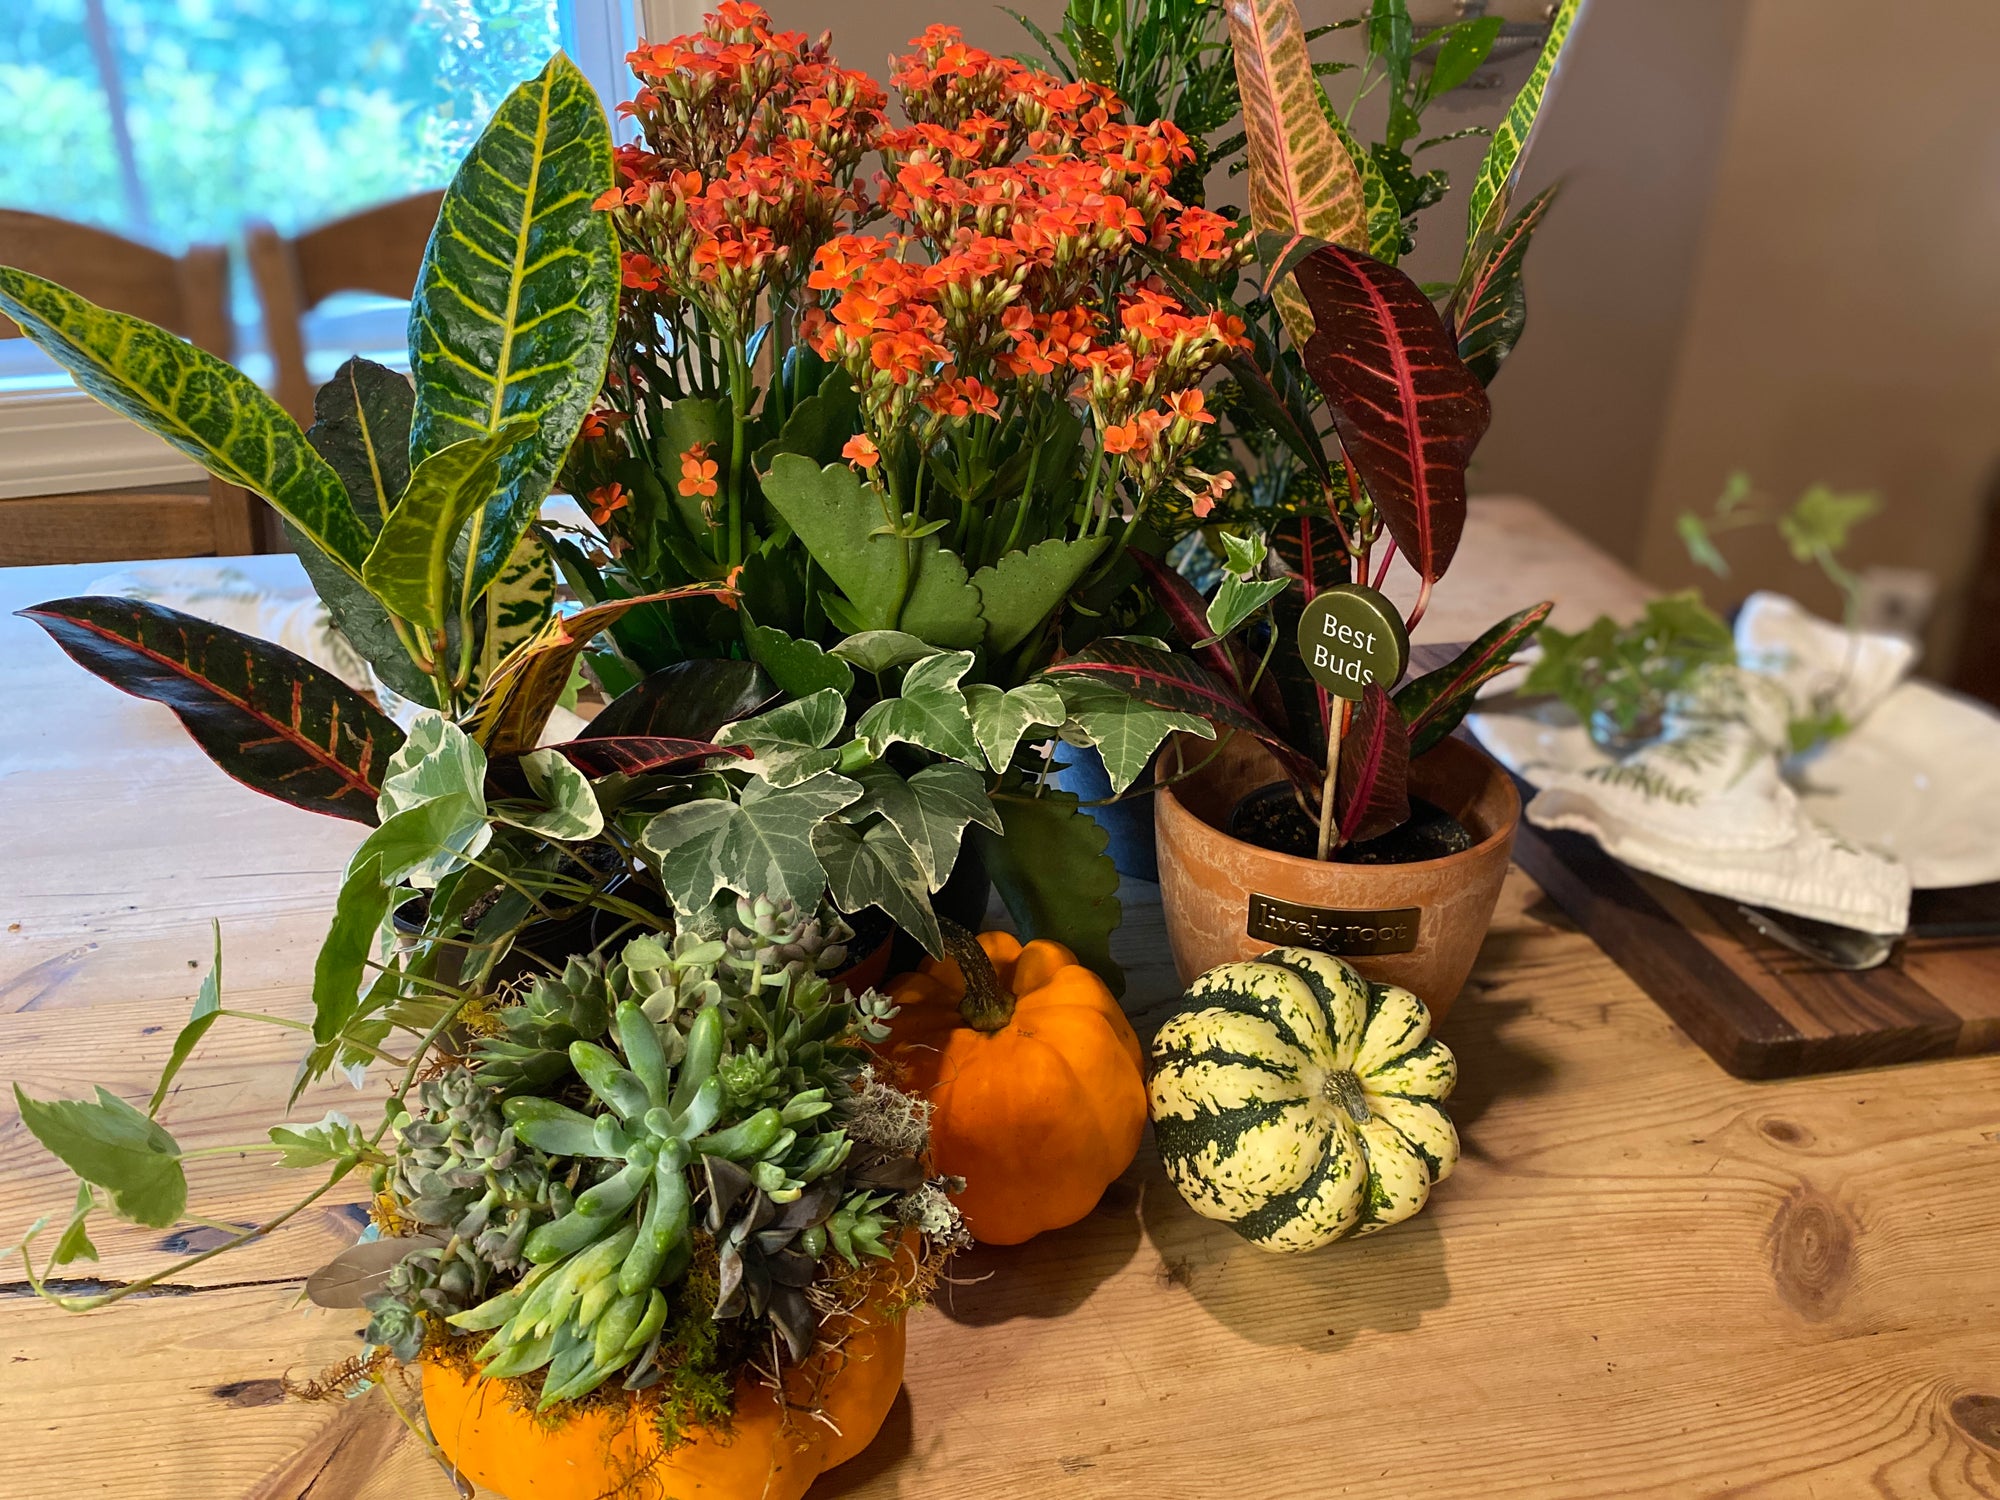 Decorating Ideas for Fall Festivities